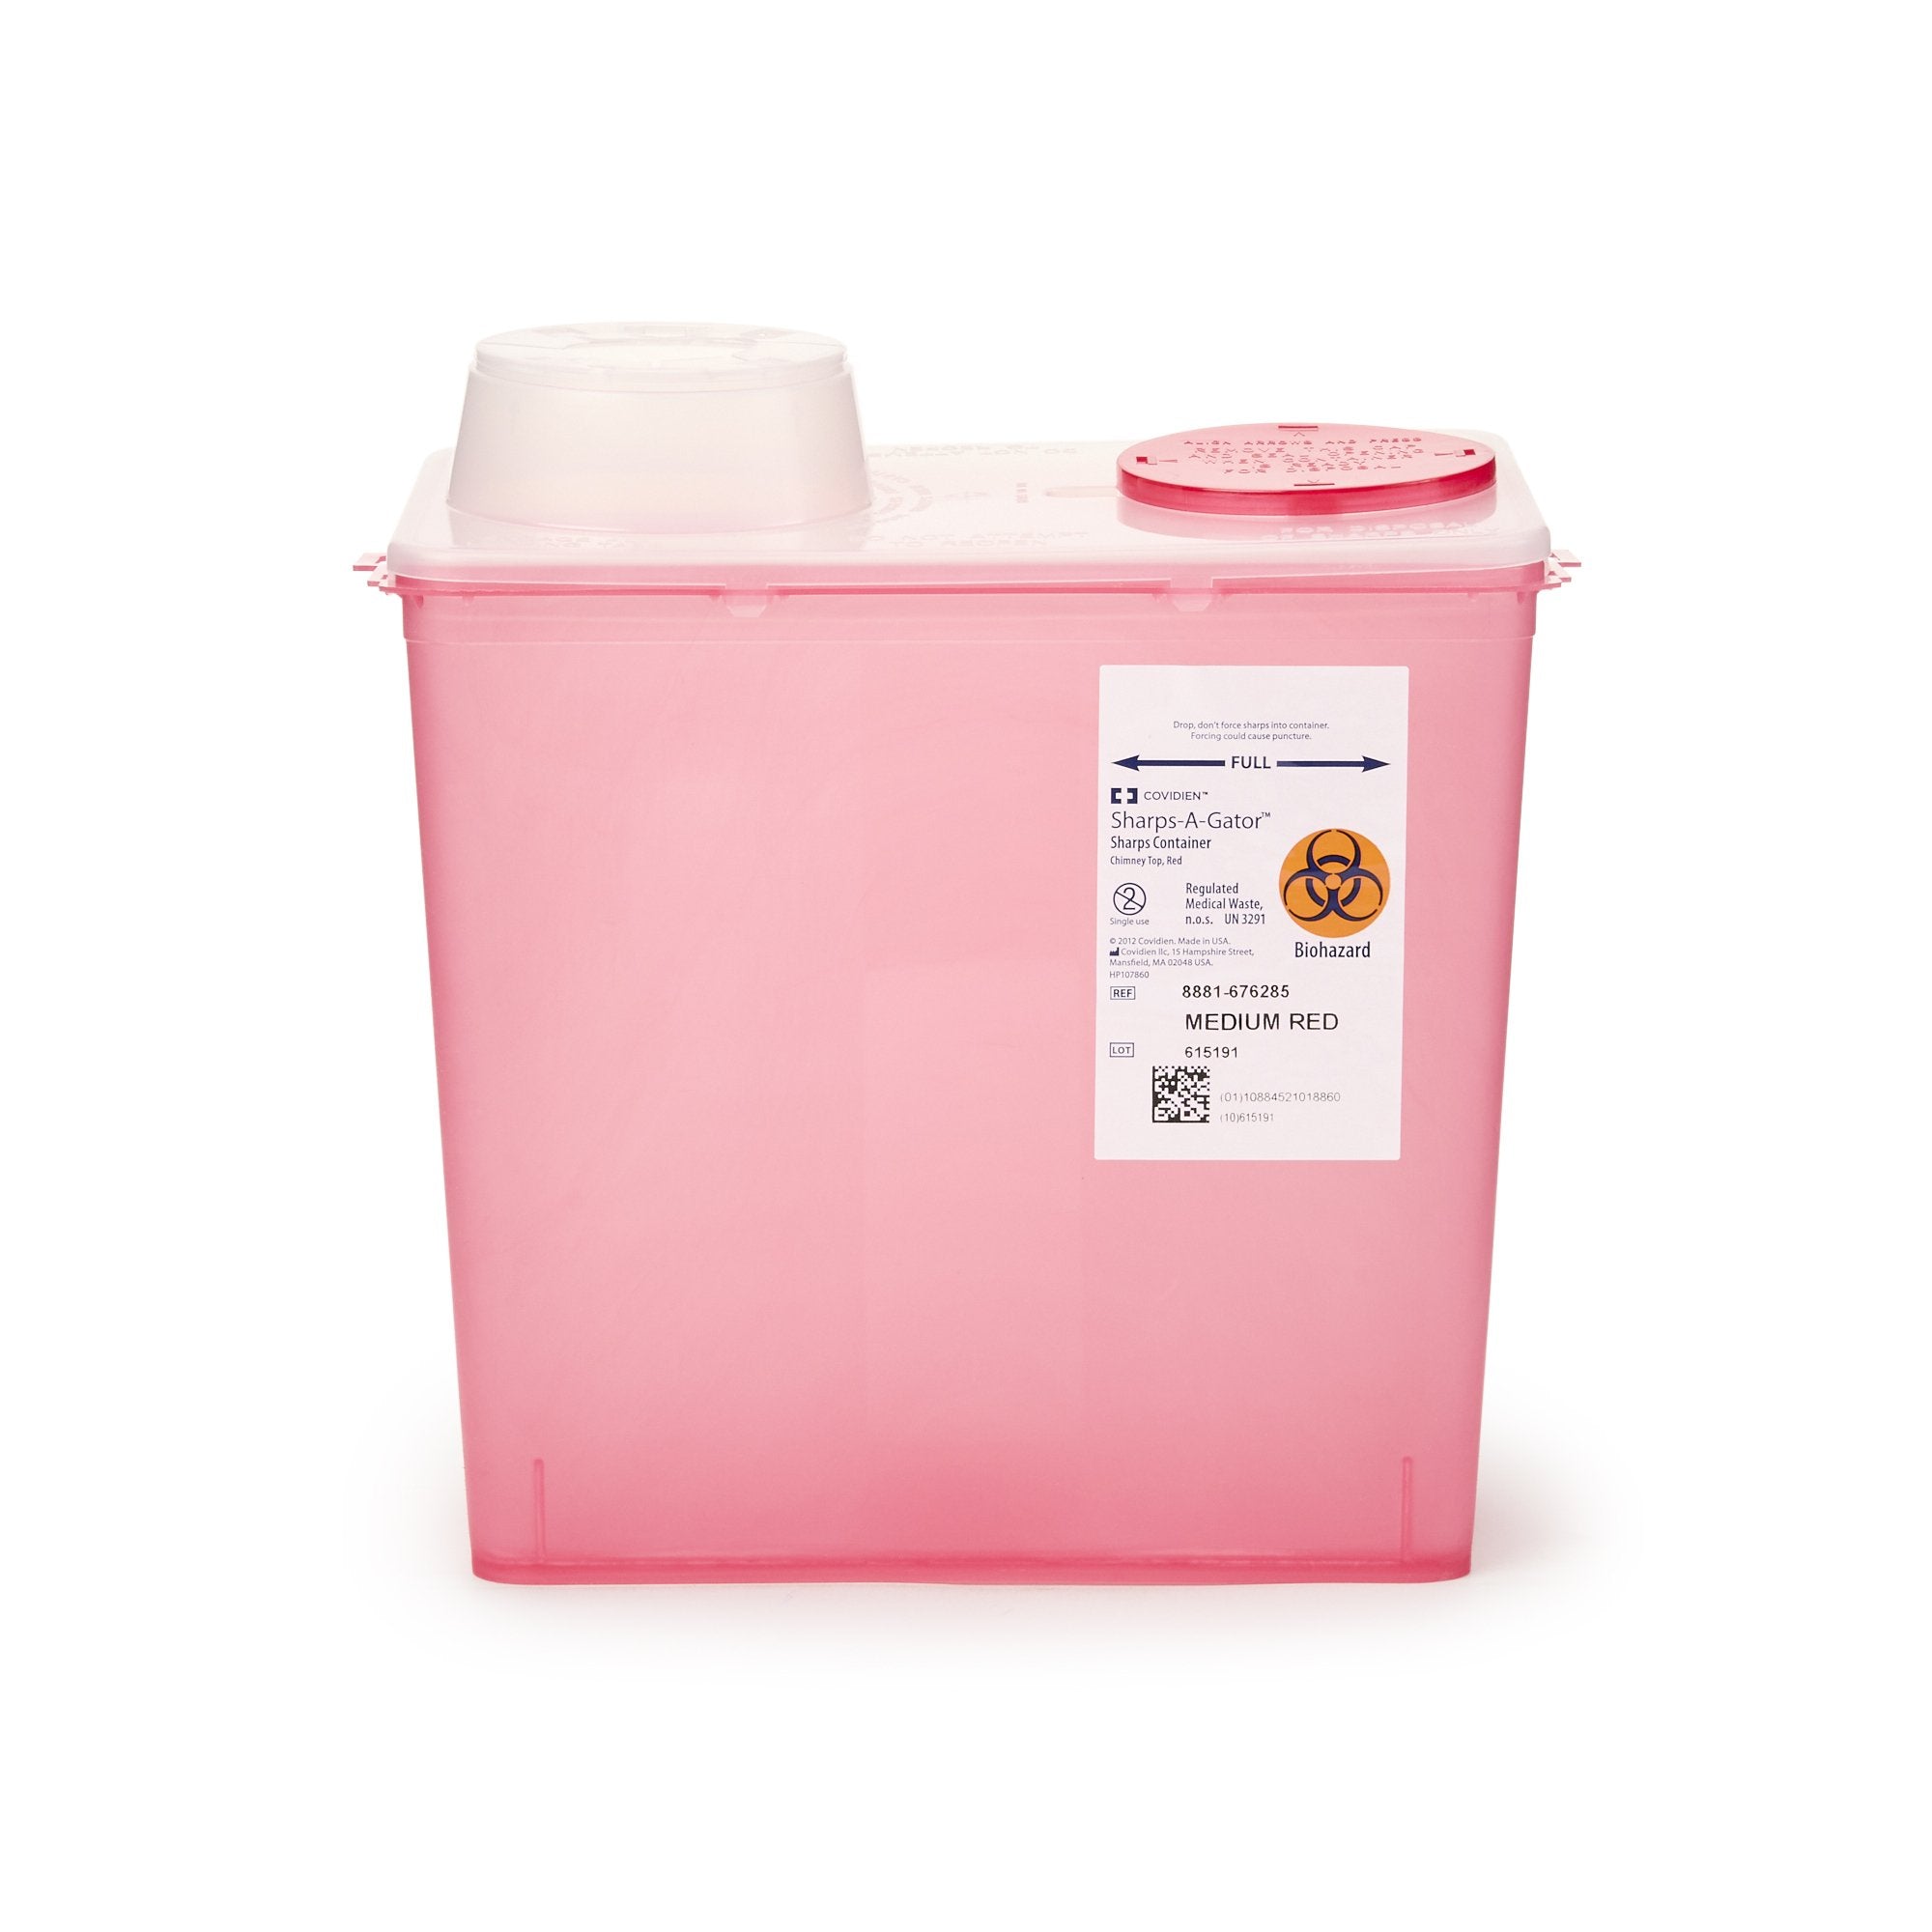 Sharps Container Monoject™ Red Base 10-9/10 H X 10-1/2 W X 6-3/4 D Inch Vertical Entry 2 Gallon